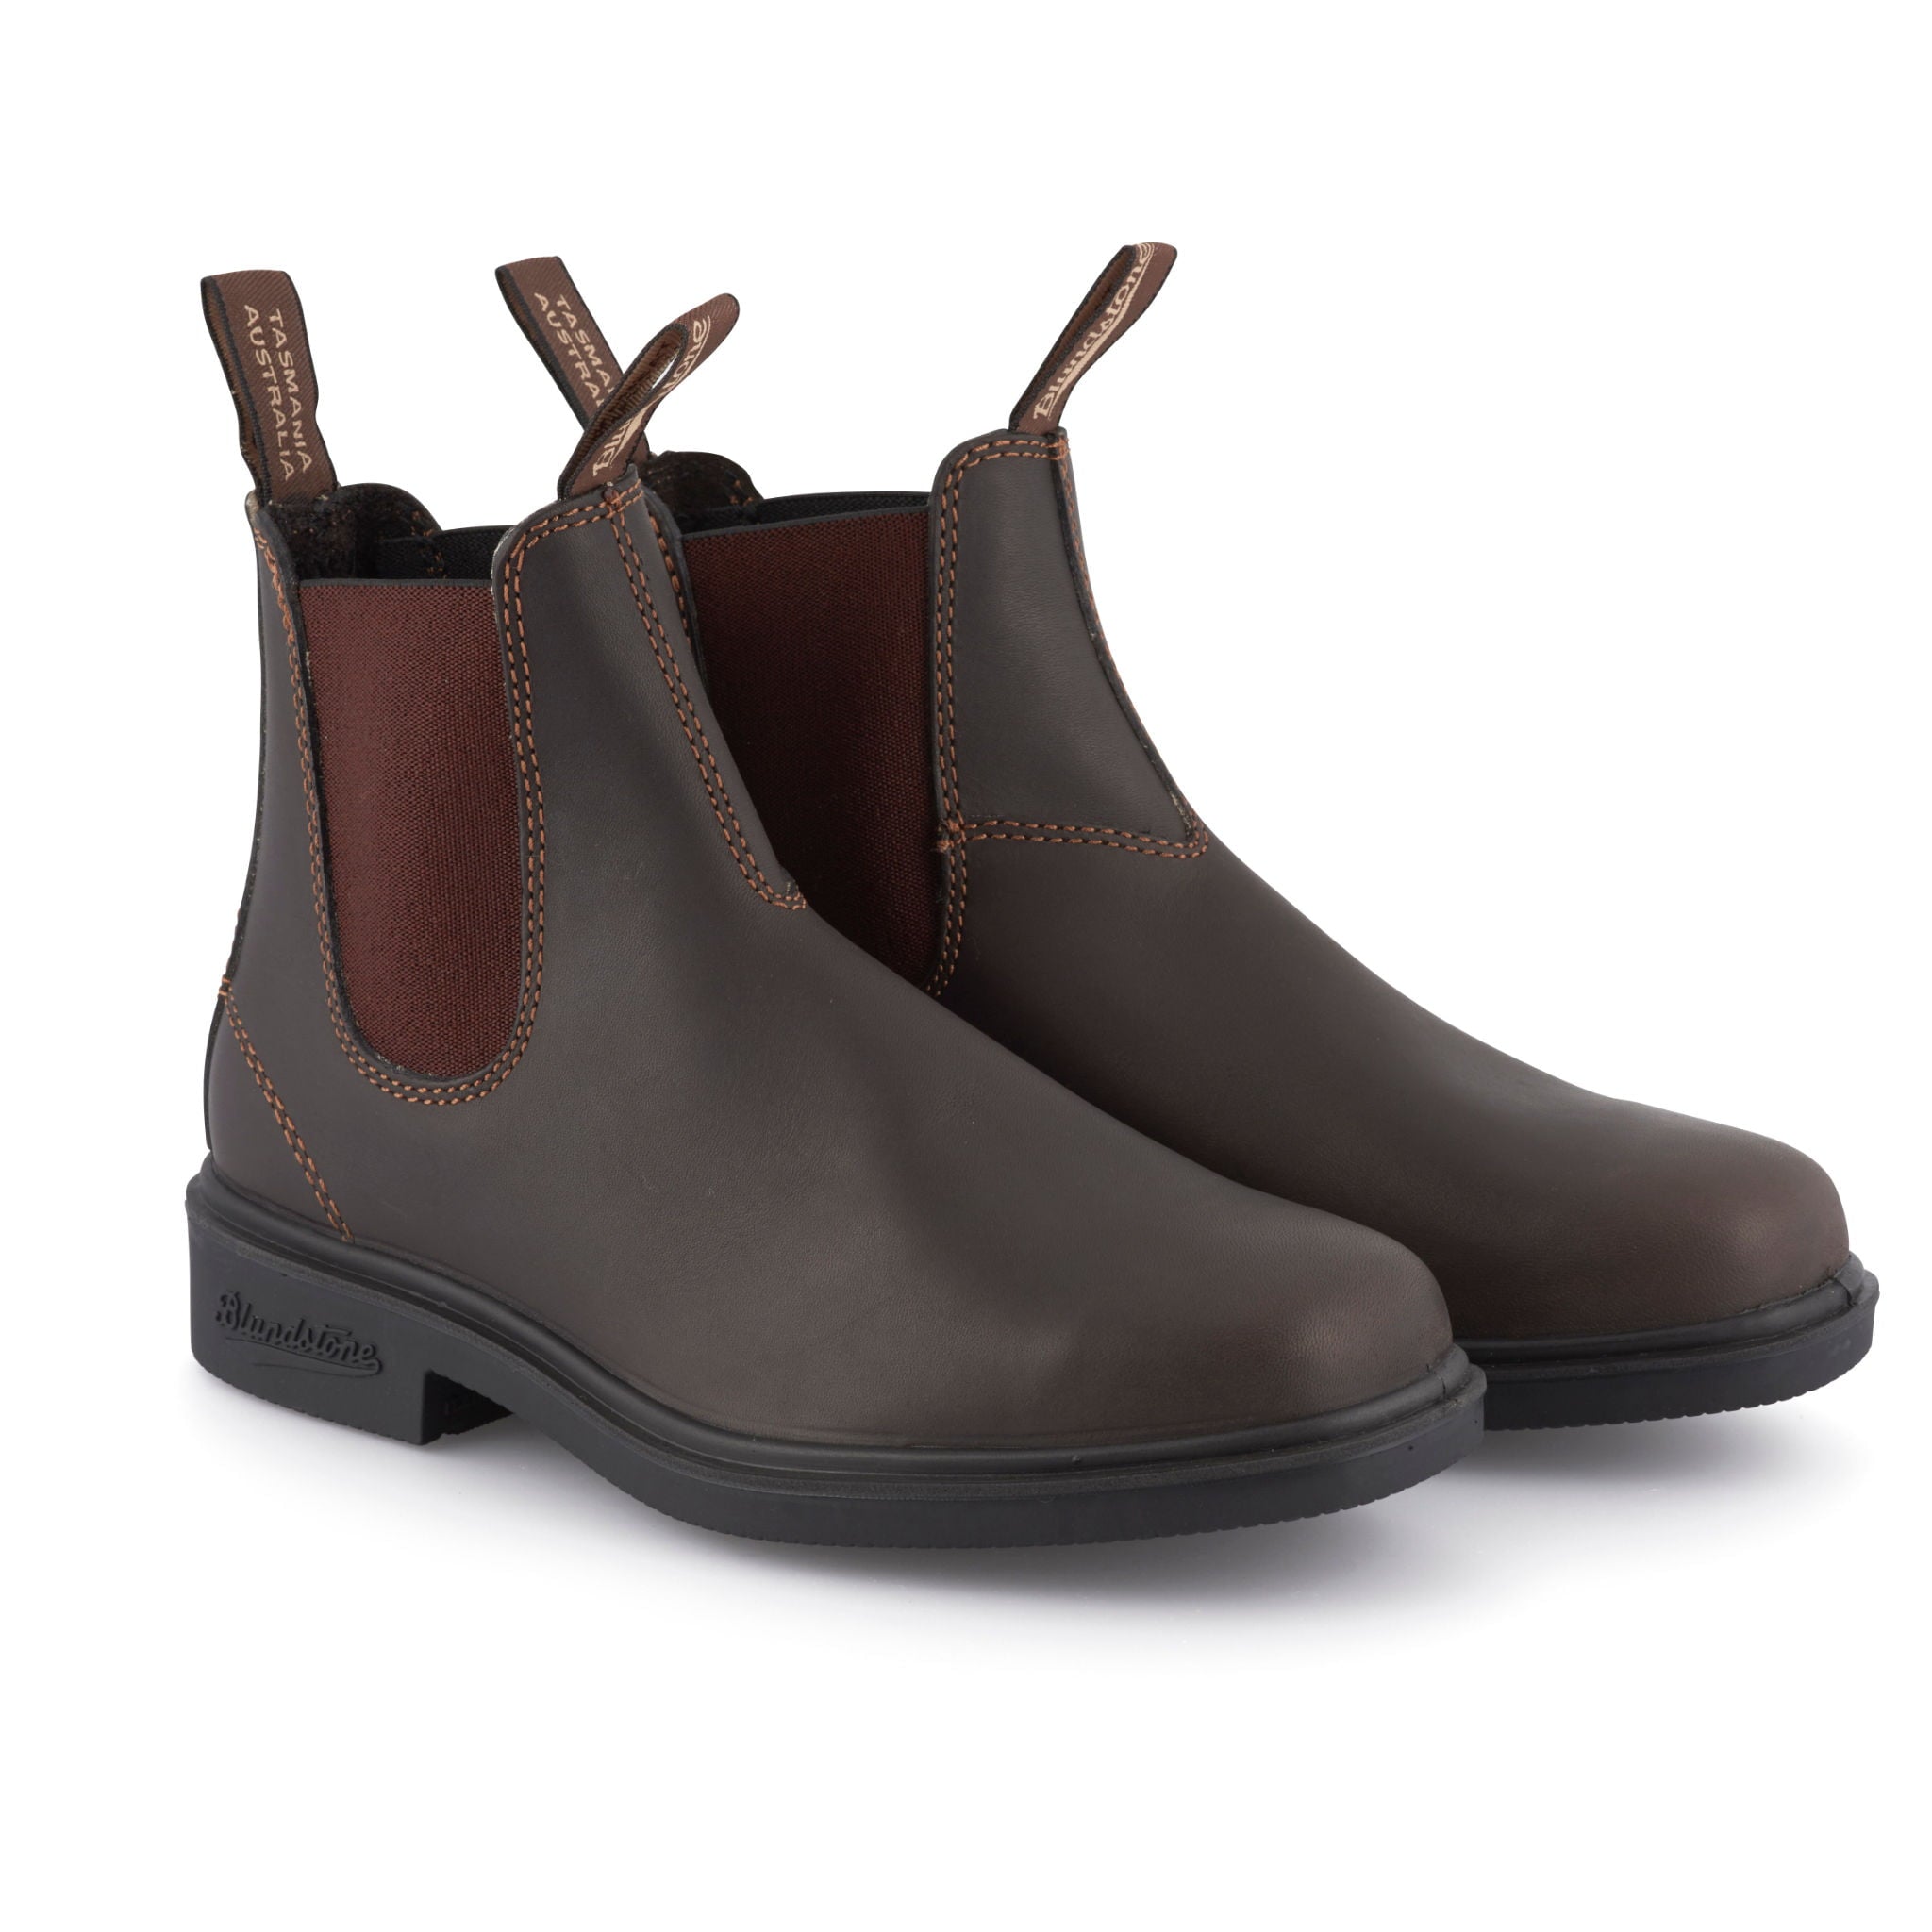 Blundstone 062 Leather Boots - Brown